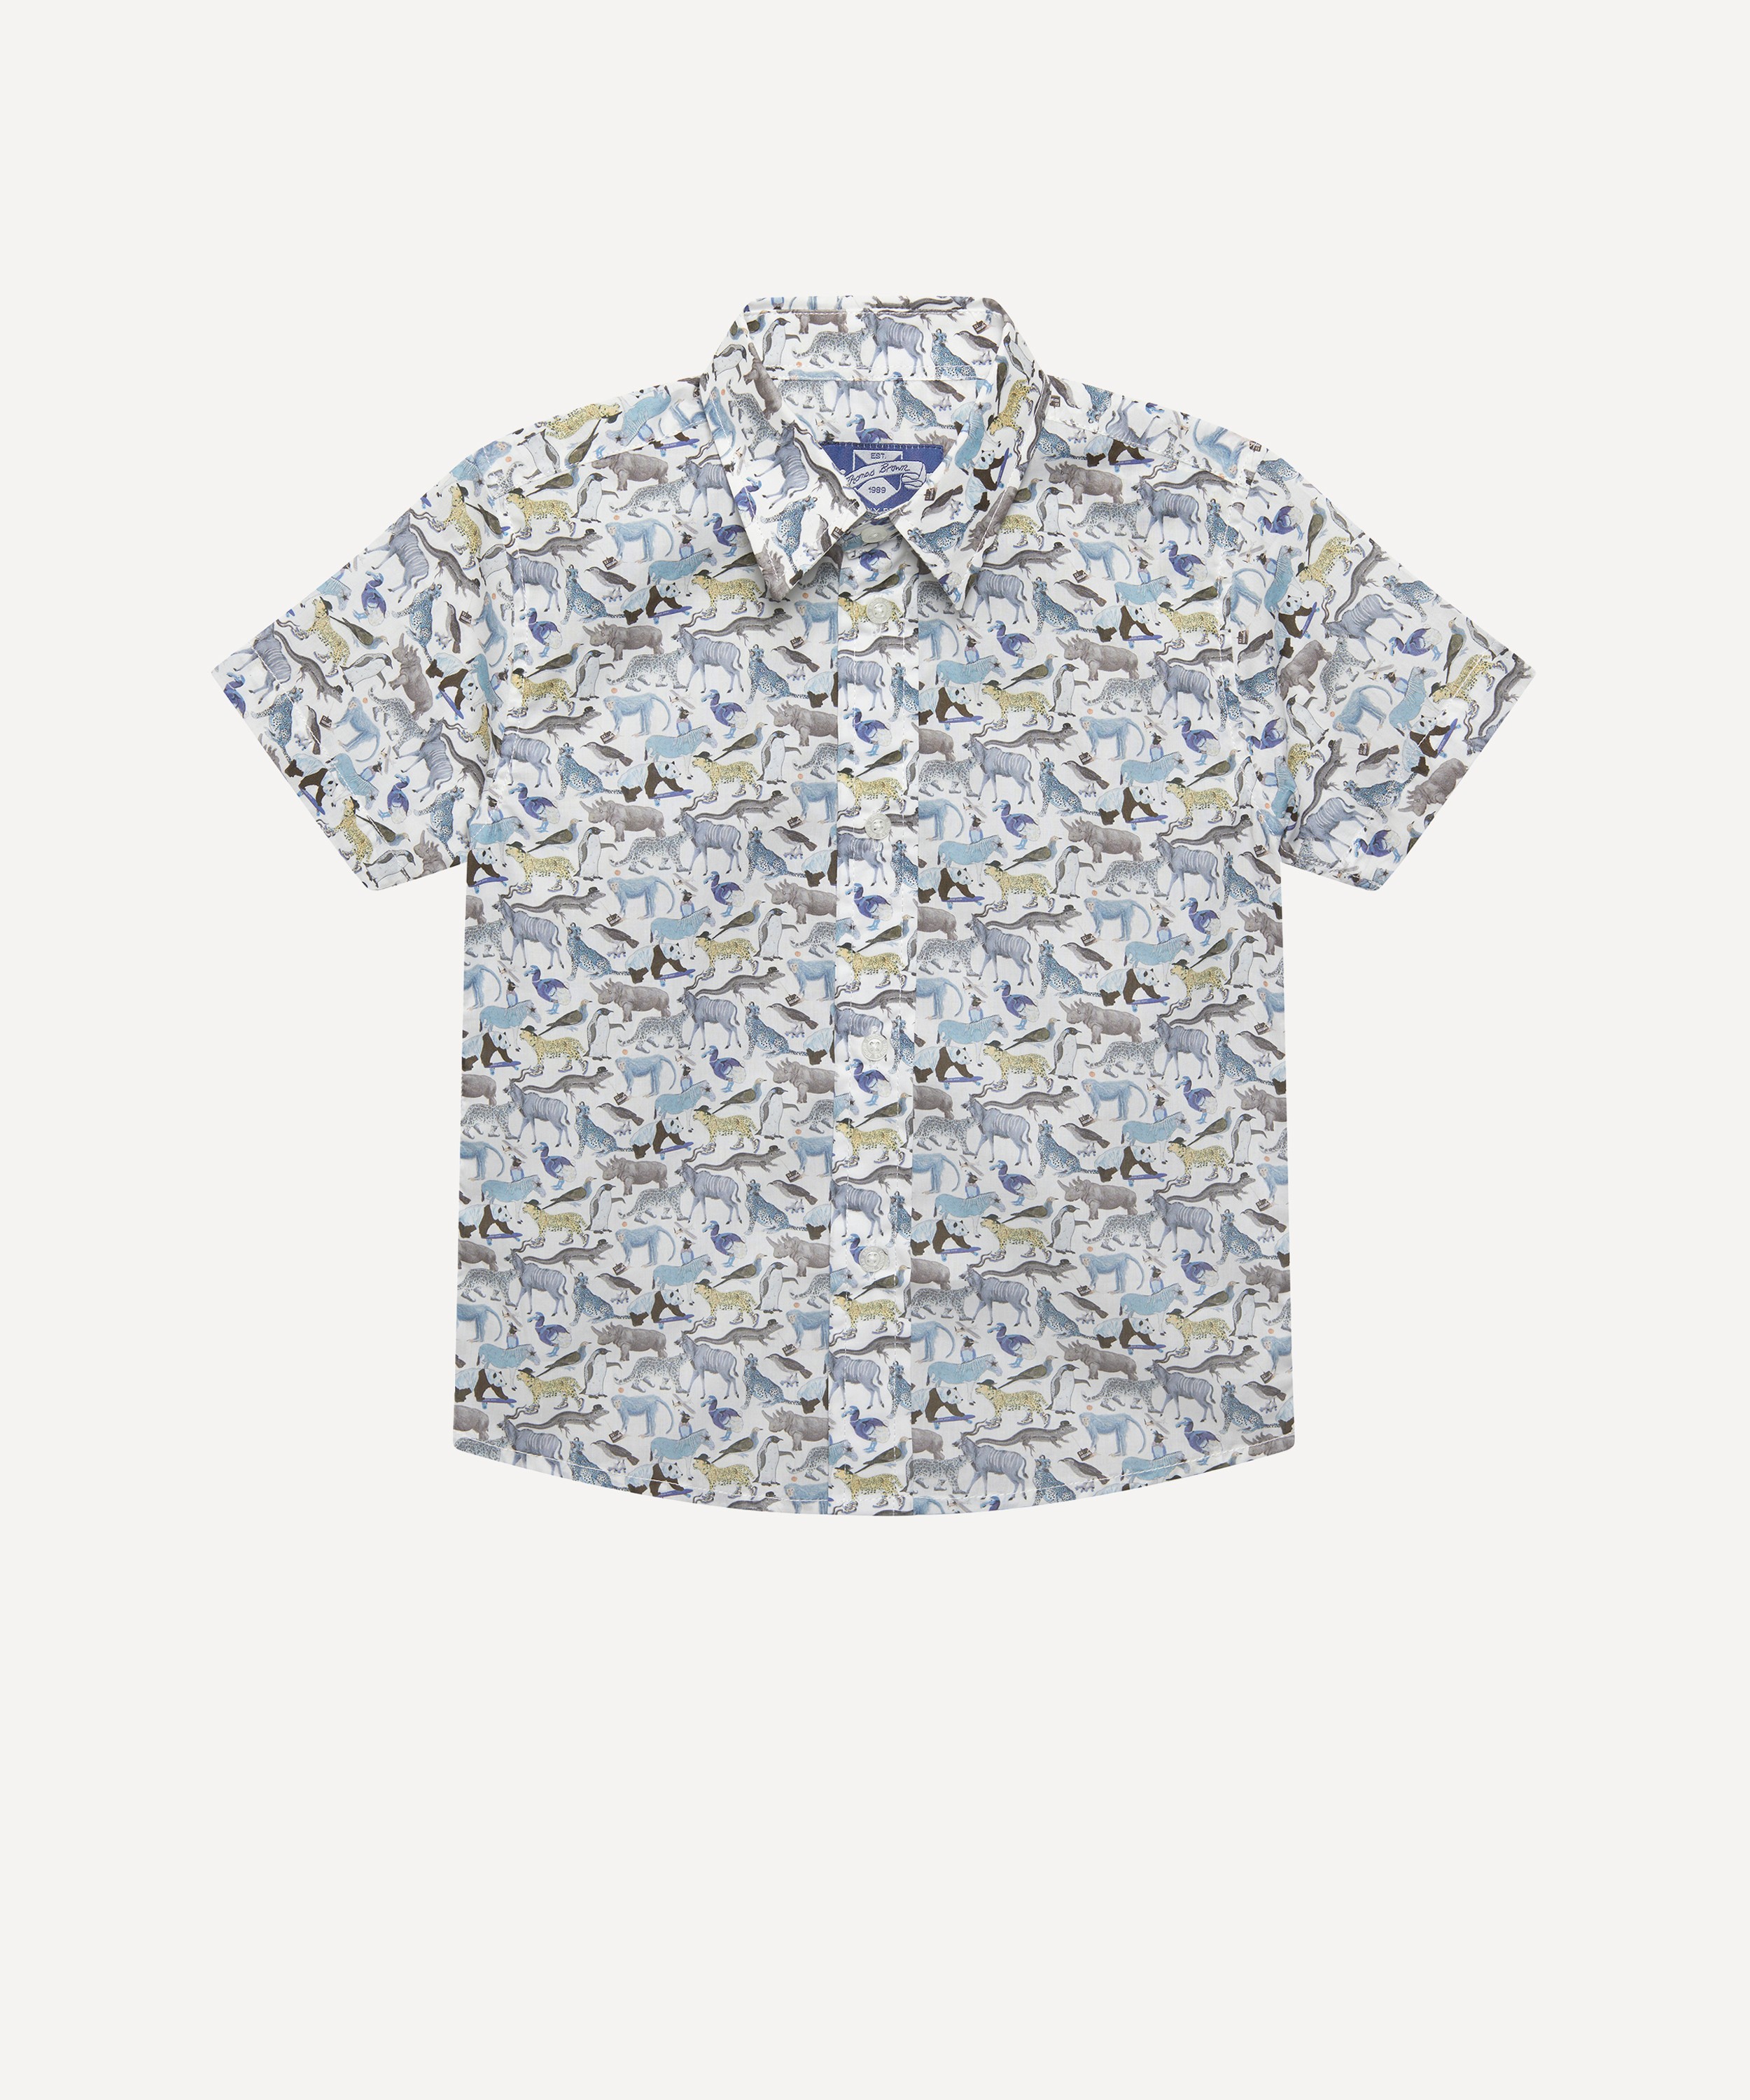 Trotters - Short Sleeve Zoo Shirt 2-5 Years image number 0